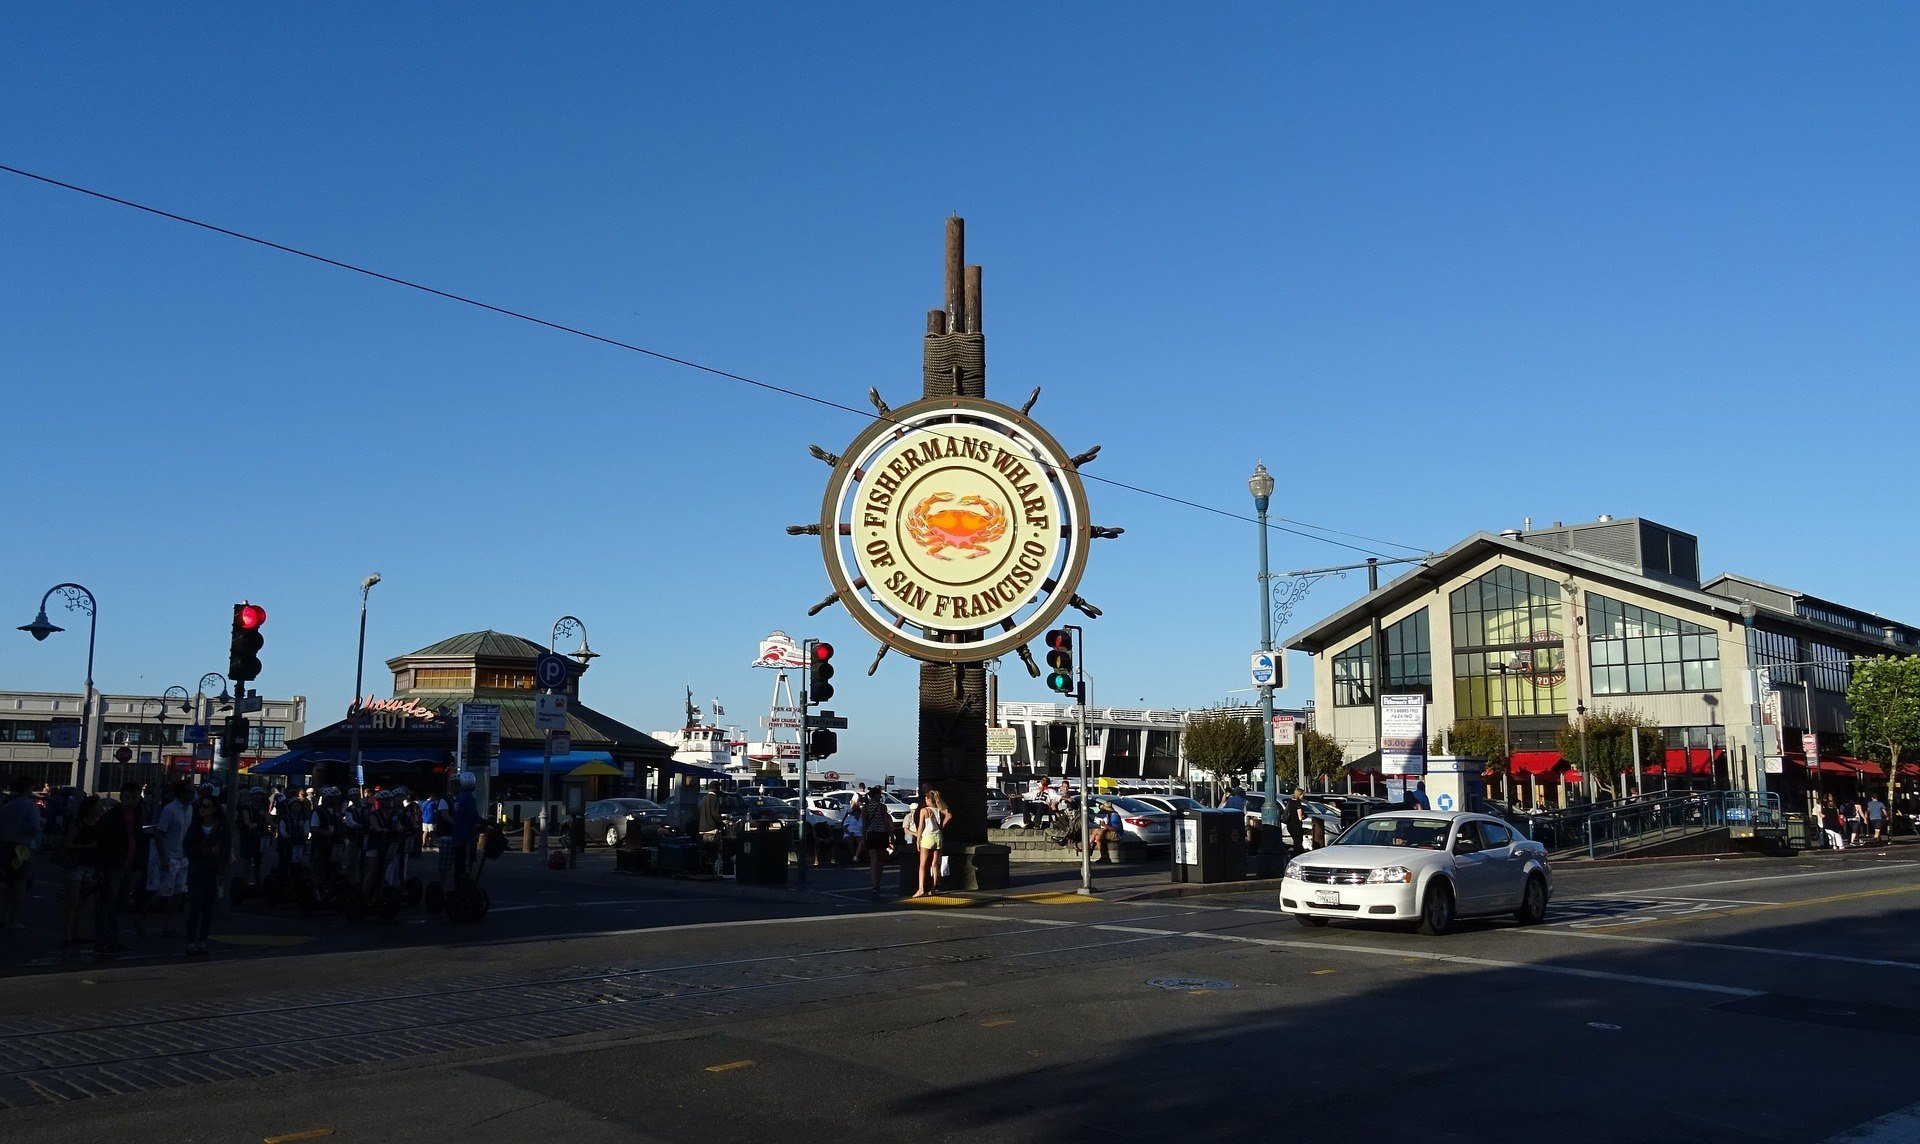 Fisherman’s Wharf - Best Place to Stay With Family in San Francisco